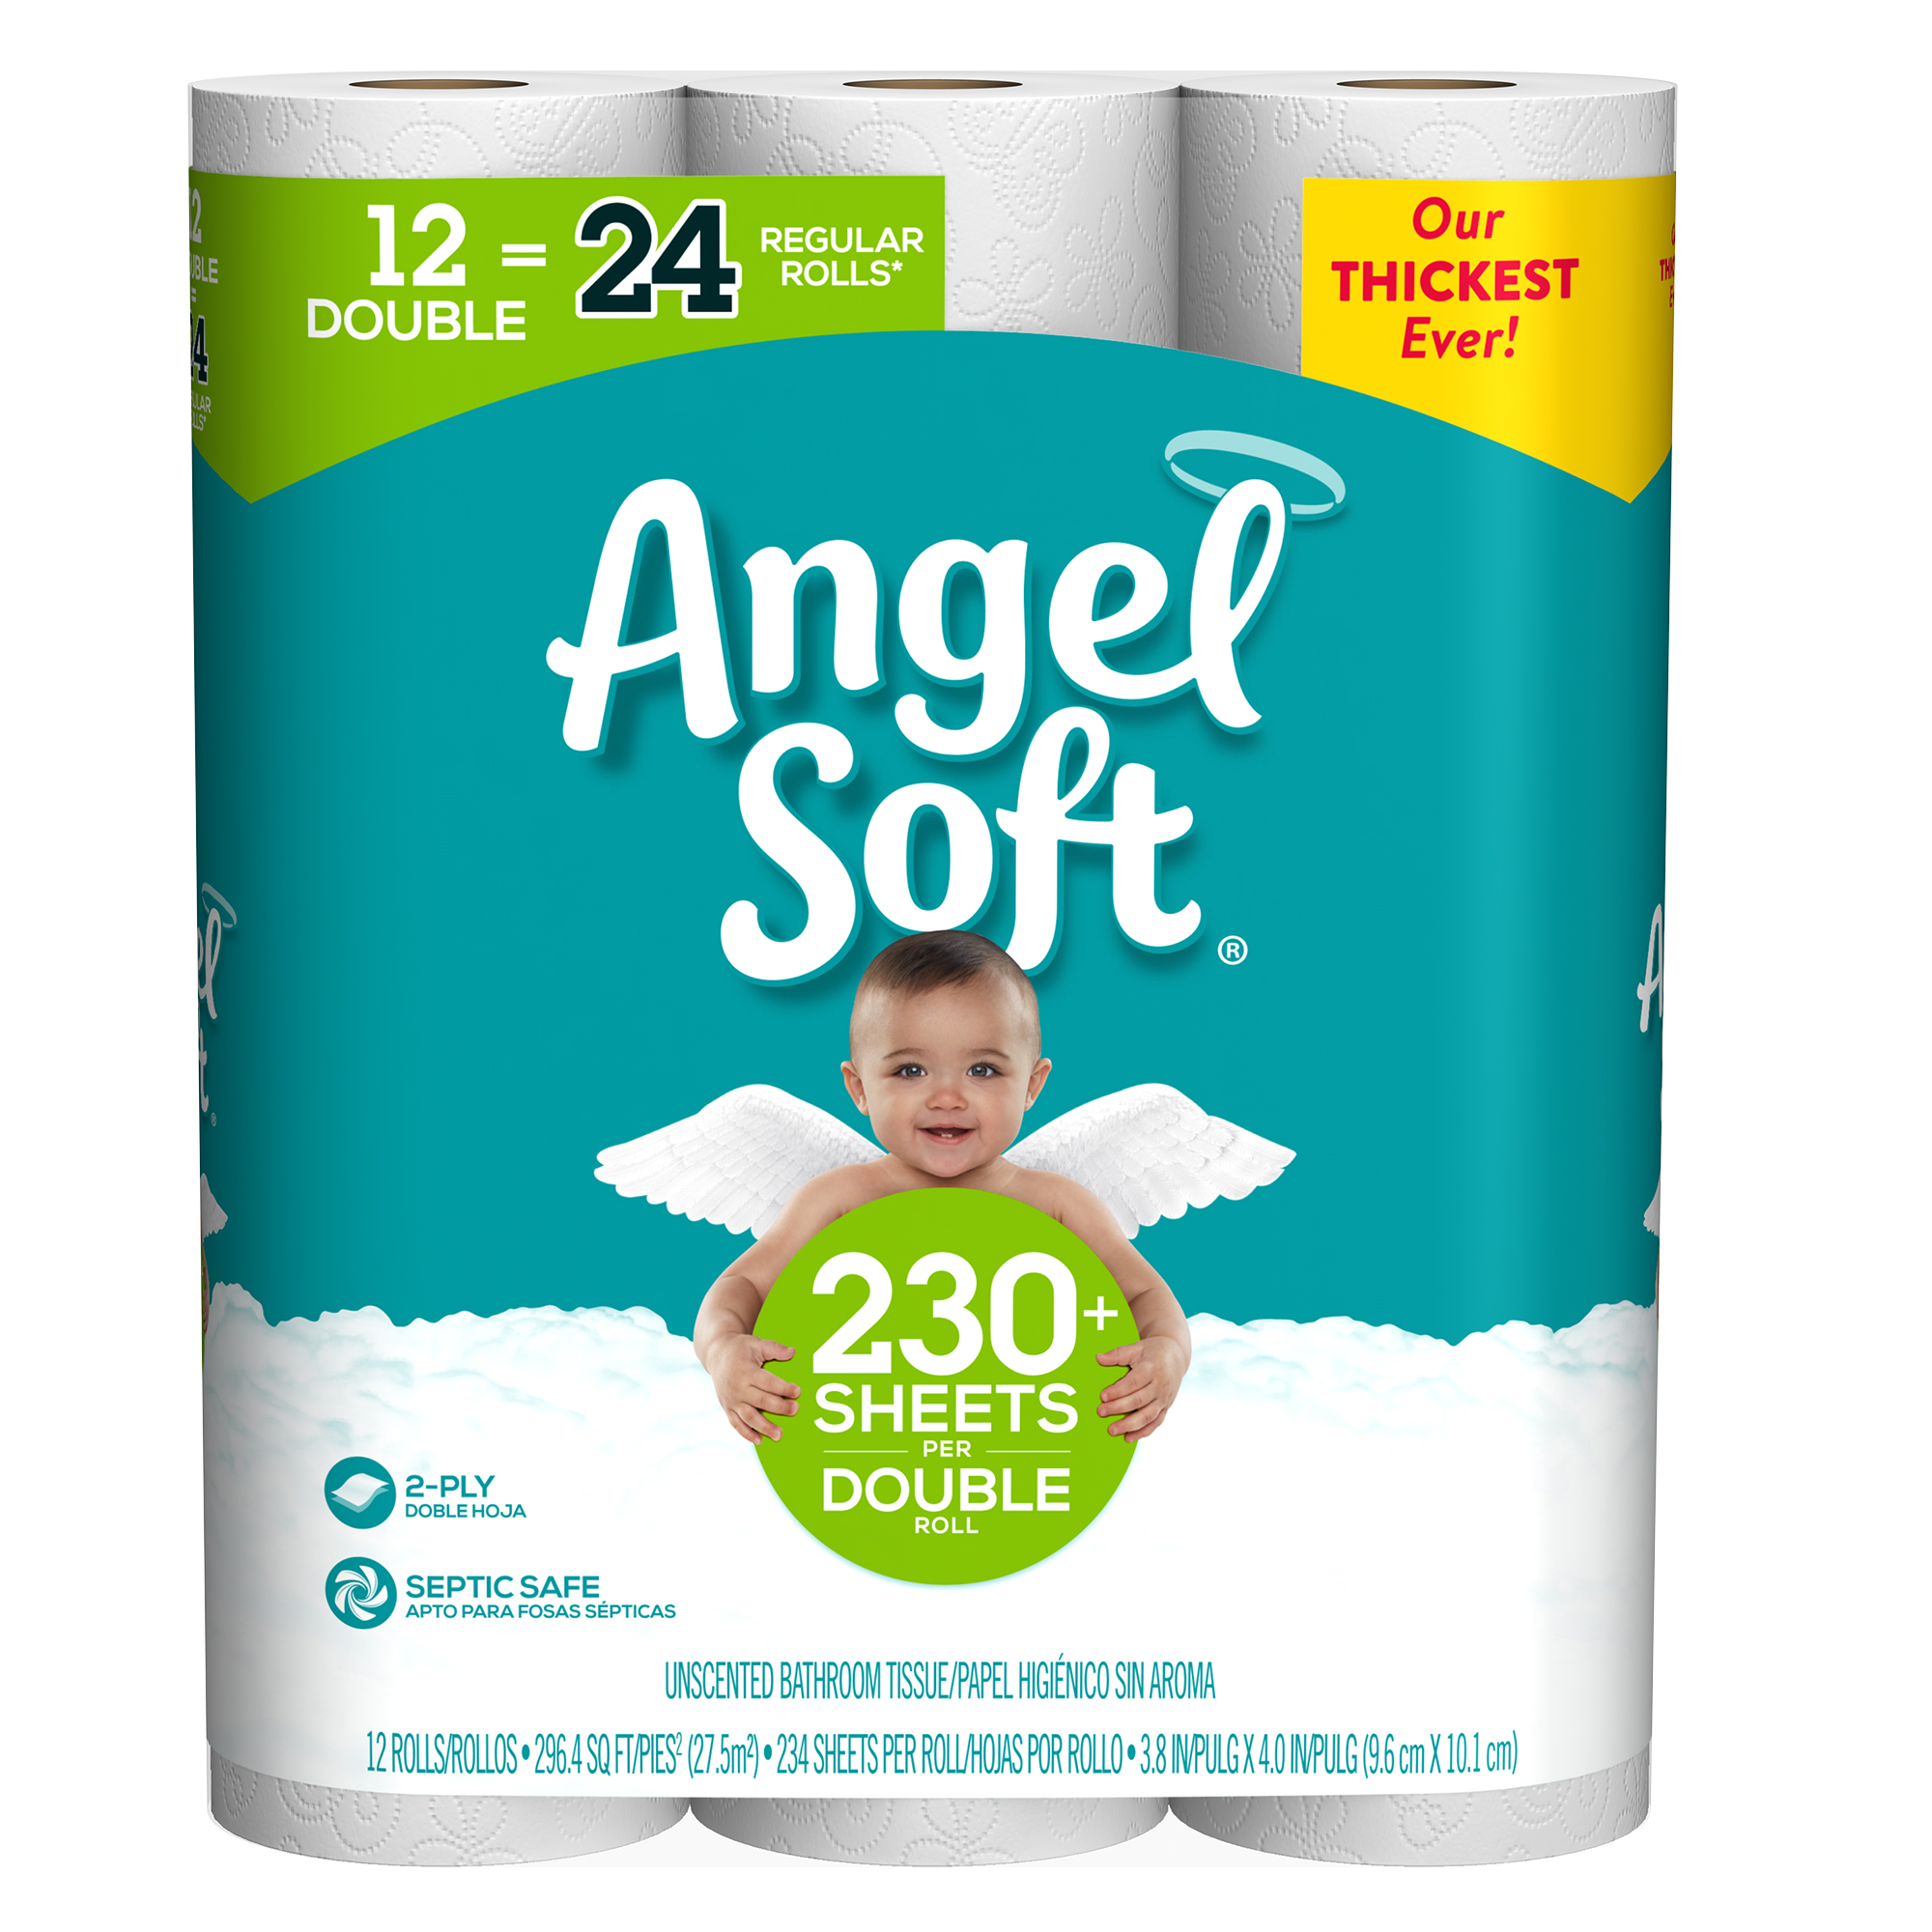 Angel Soft Toilet Paper, 12 Double Rolls - image 2 of 9